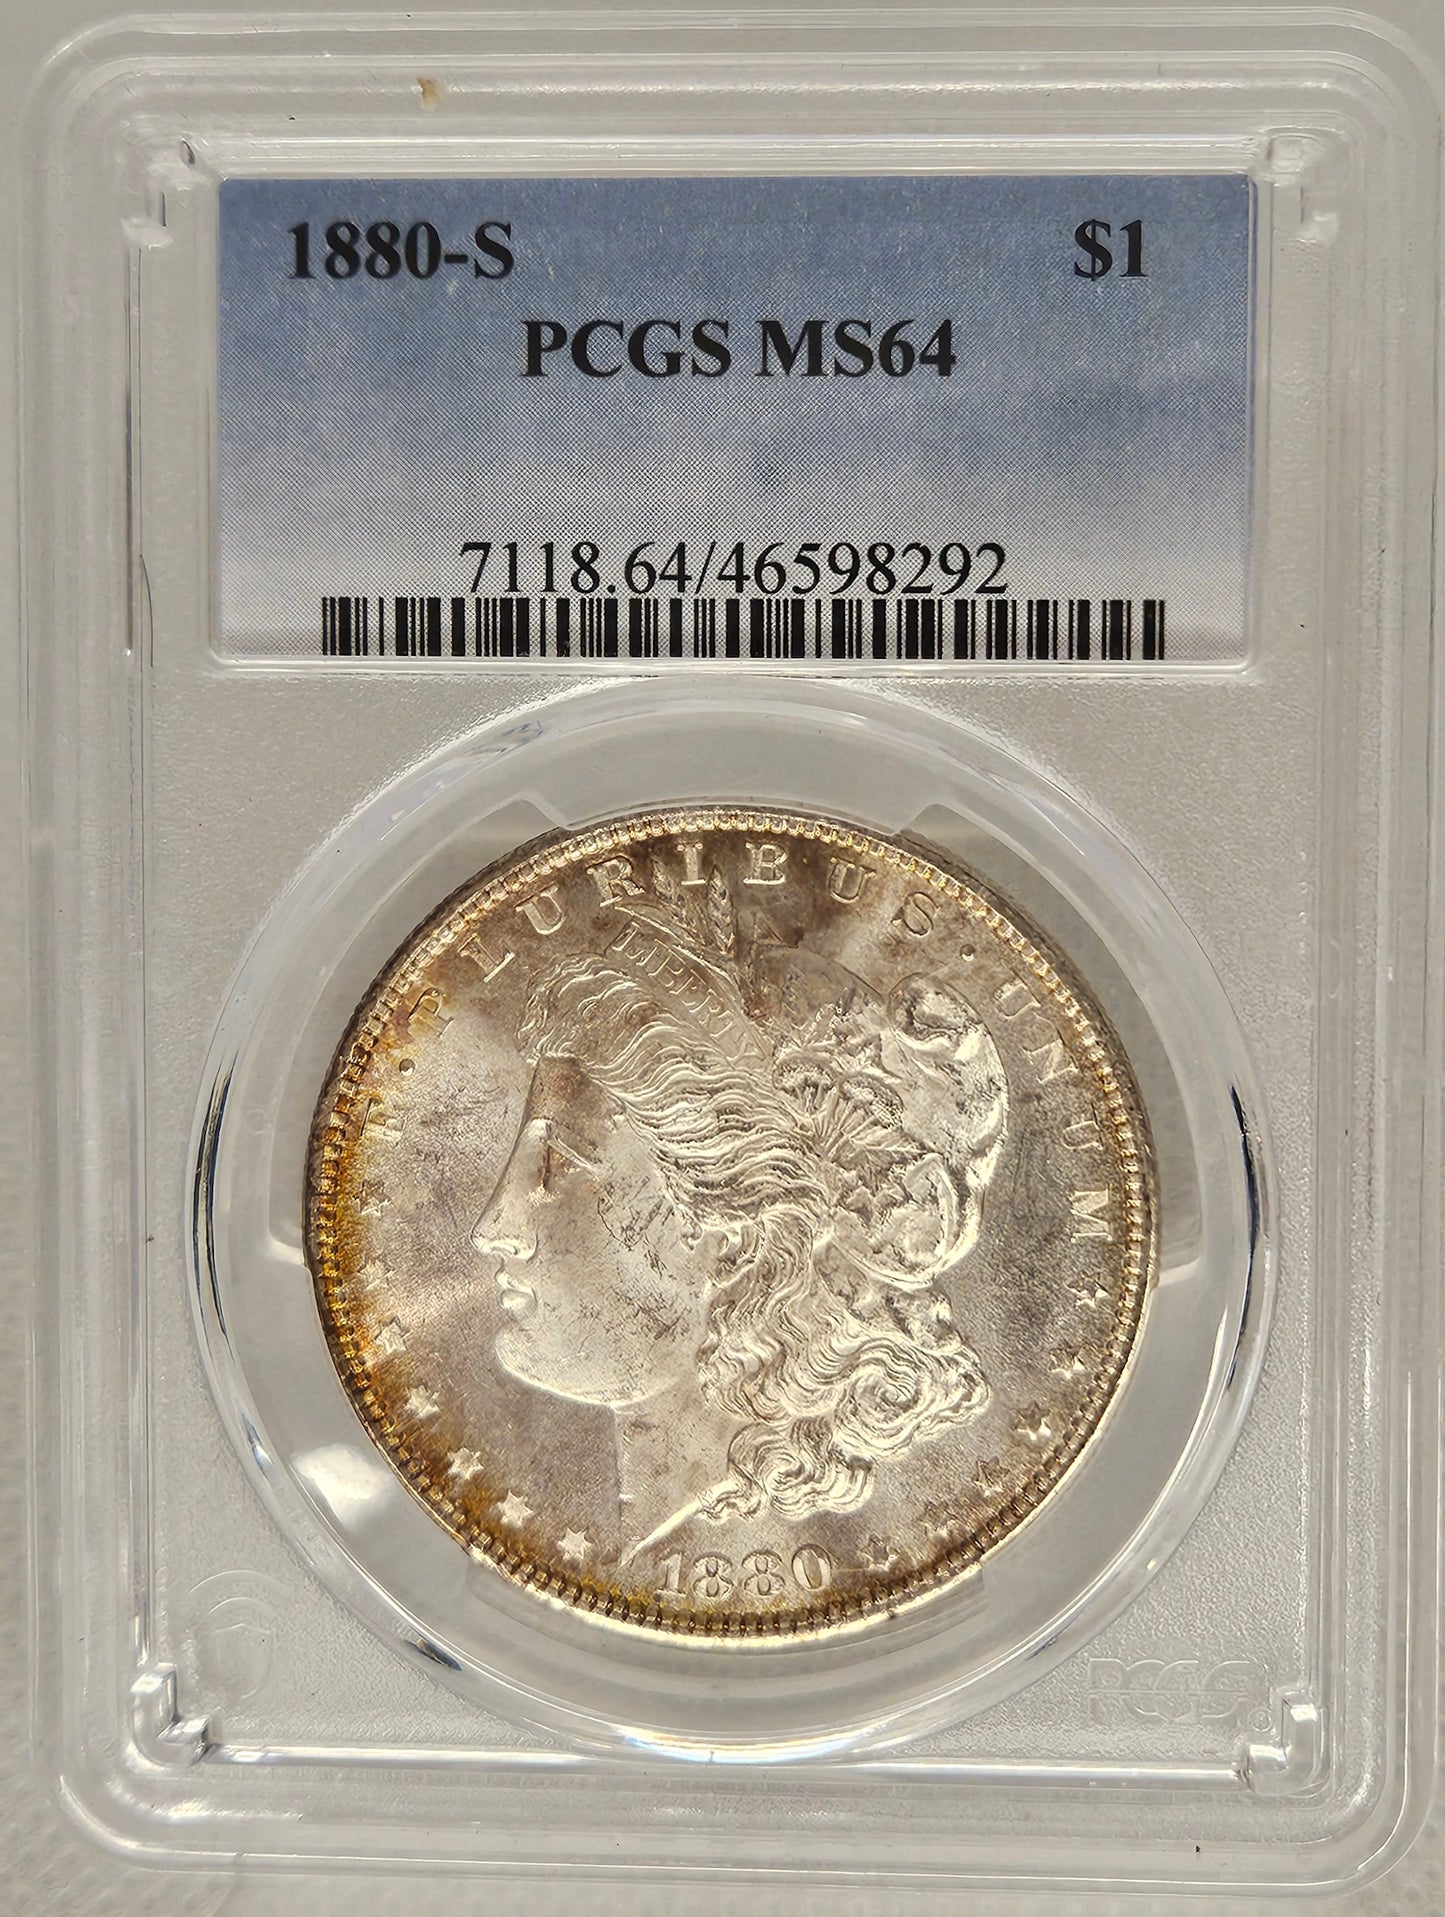 1880-S Morgan Dollar PCGS MS64  Nice Higher Grade Mint State Coin!!!